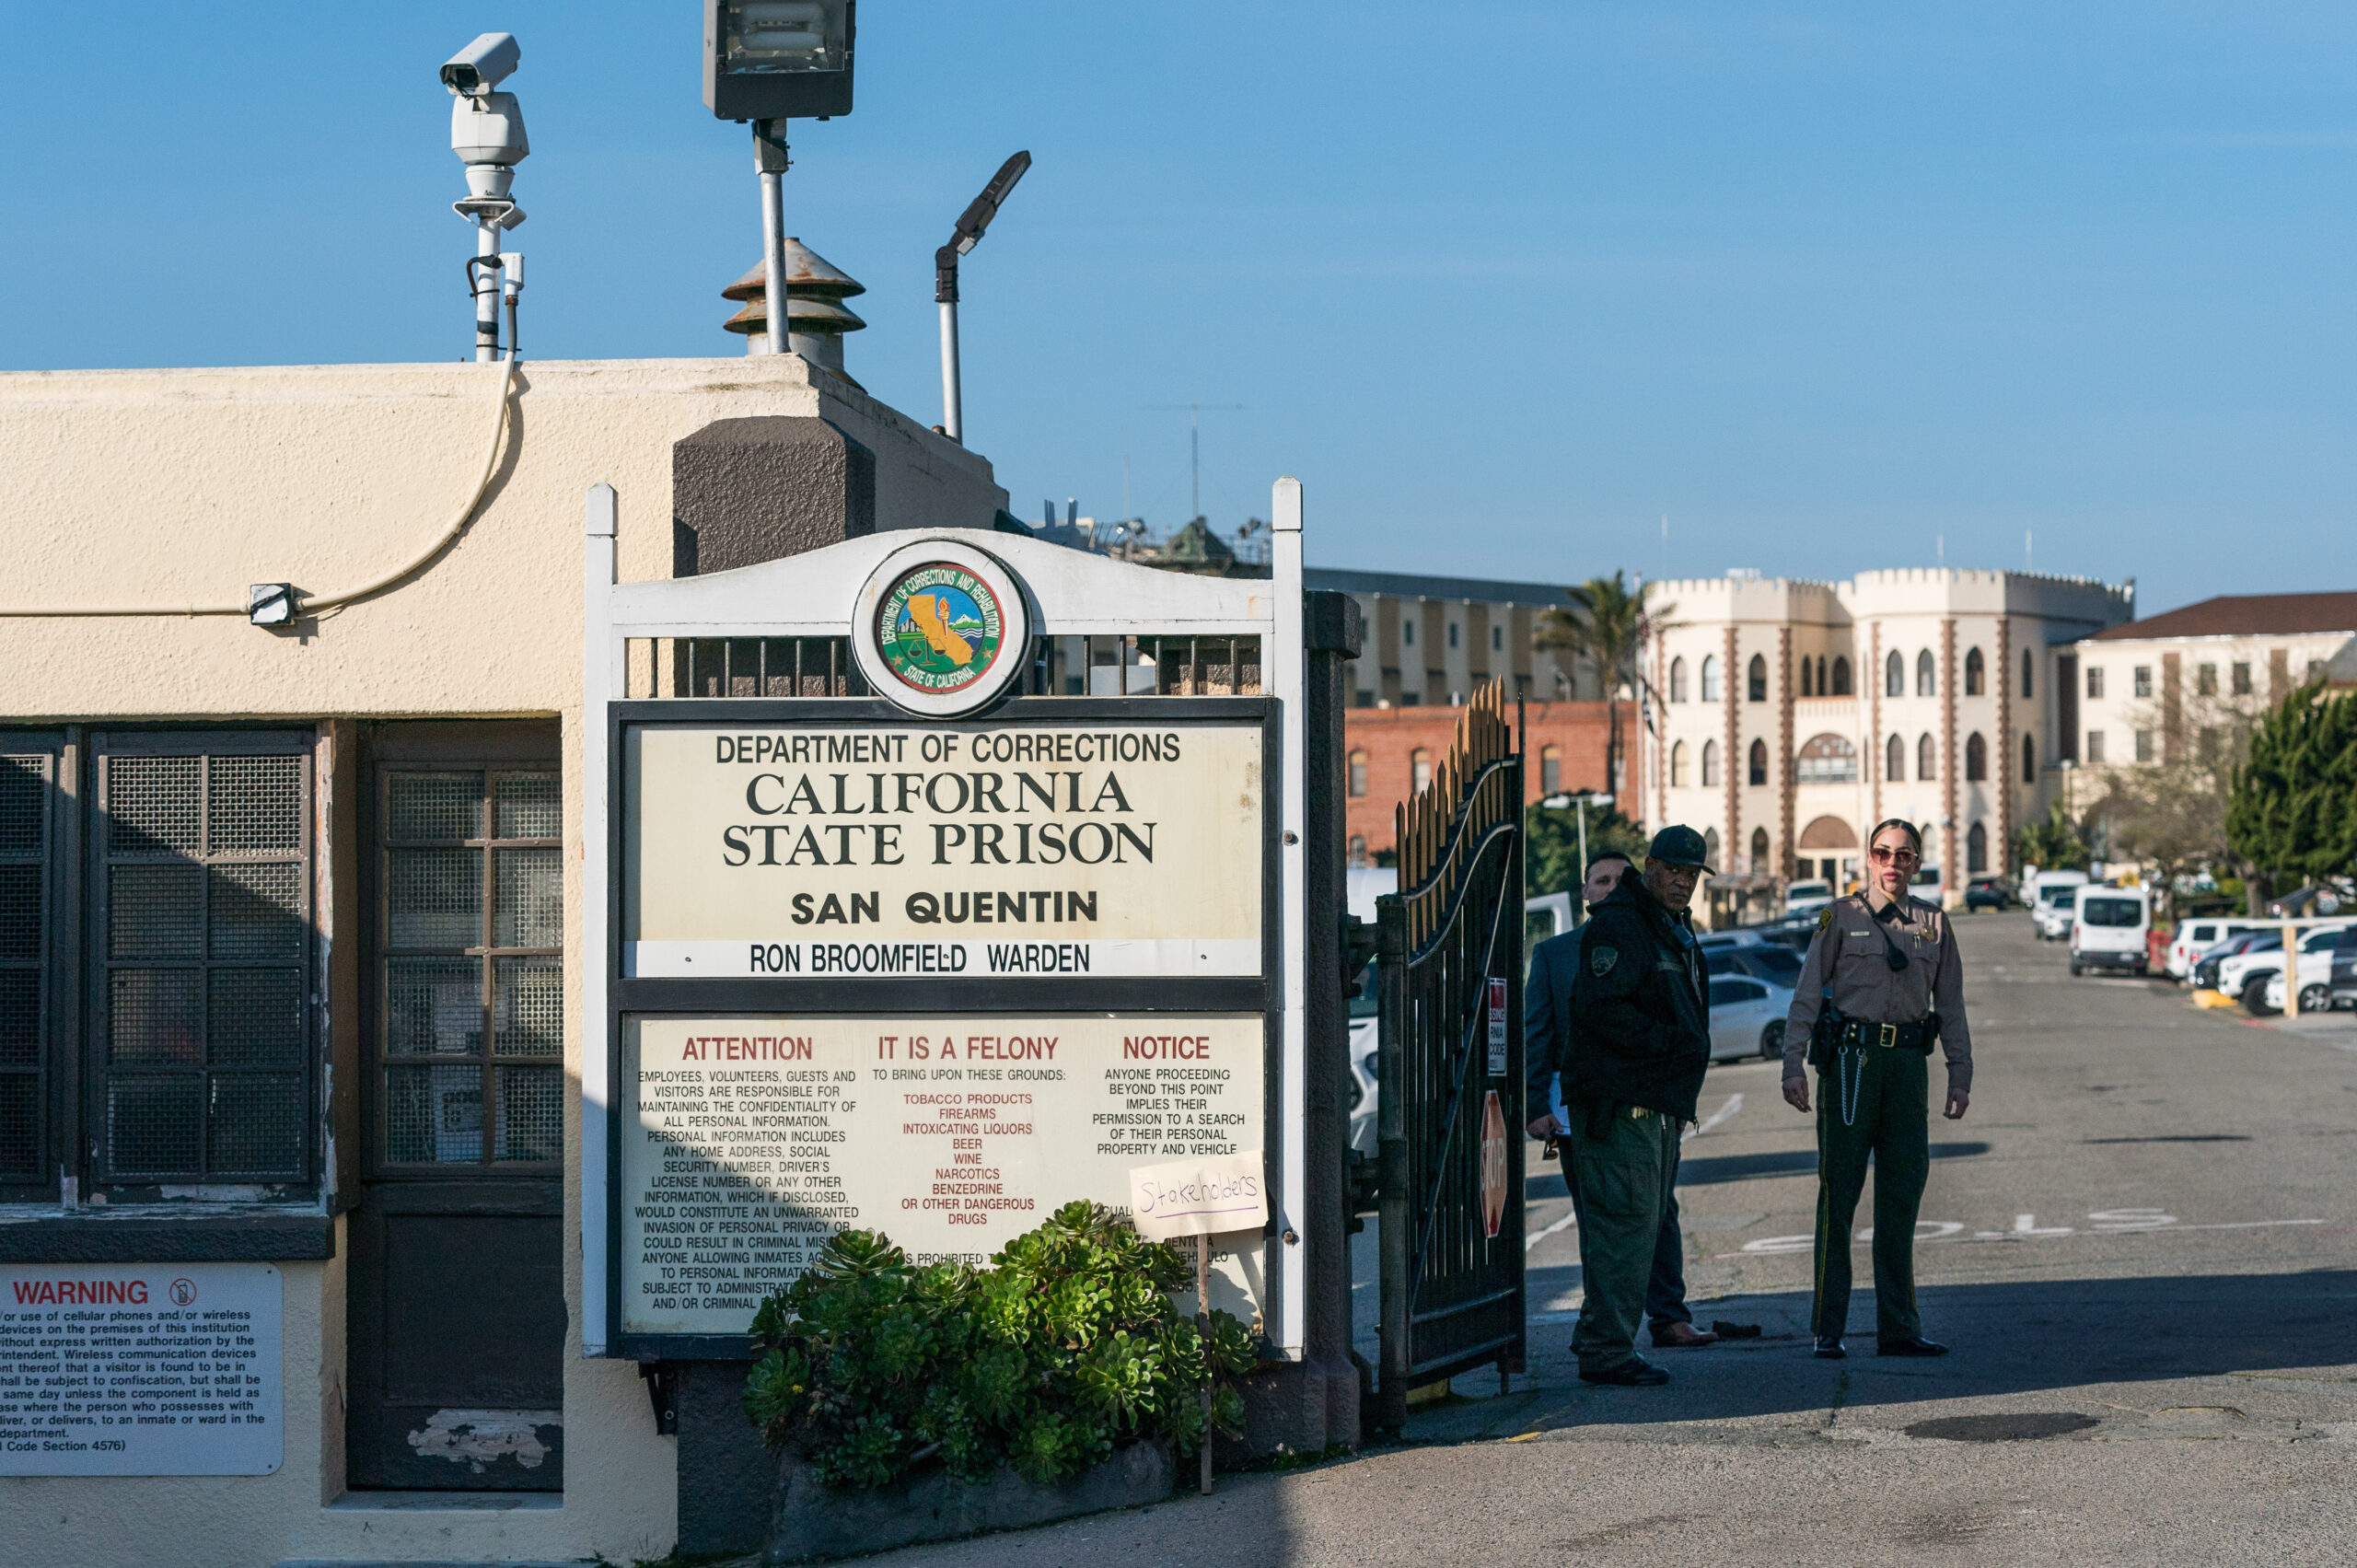 Two officers stand by the entrance of San Quentin State Prison, with a sign and security cameras nearby.